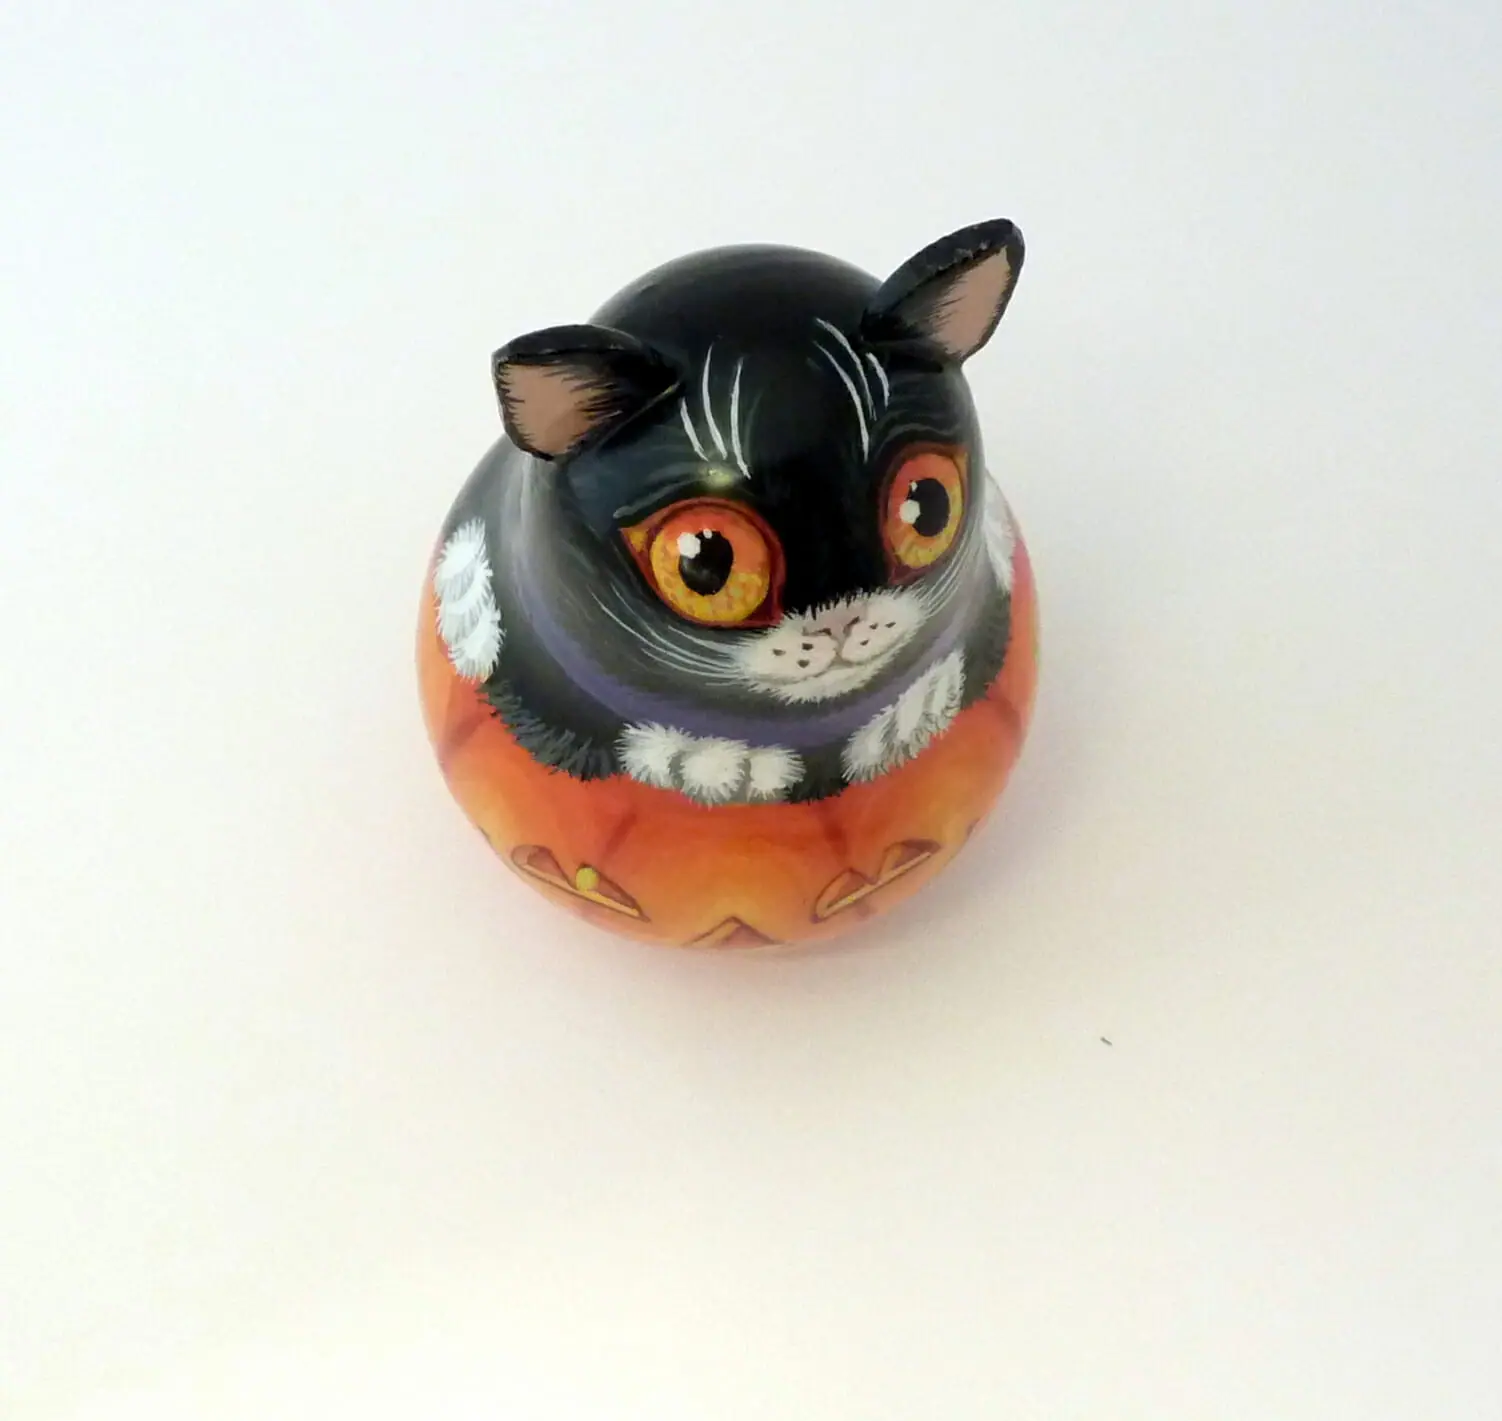 a small decorative pumpkin and a black cat . an unusual bell for halloween . wooden tinkling roly poly doll hand painted 3.jpg